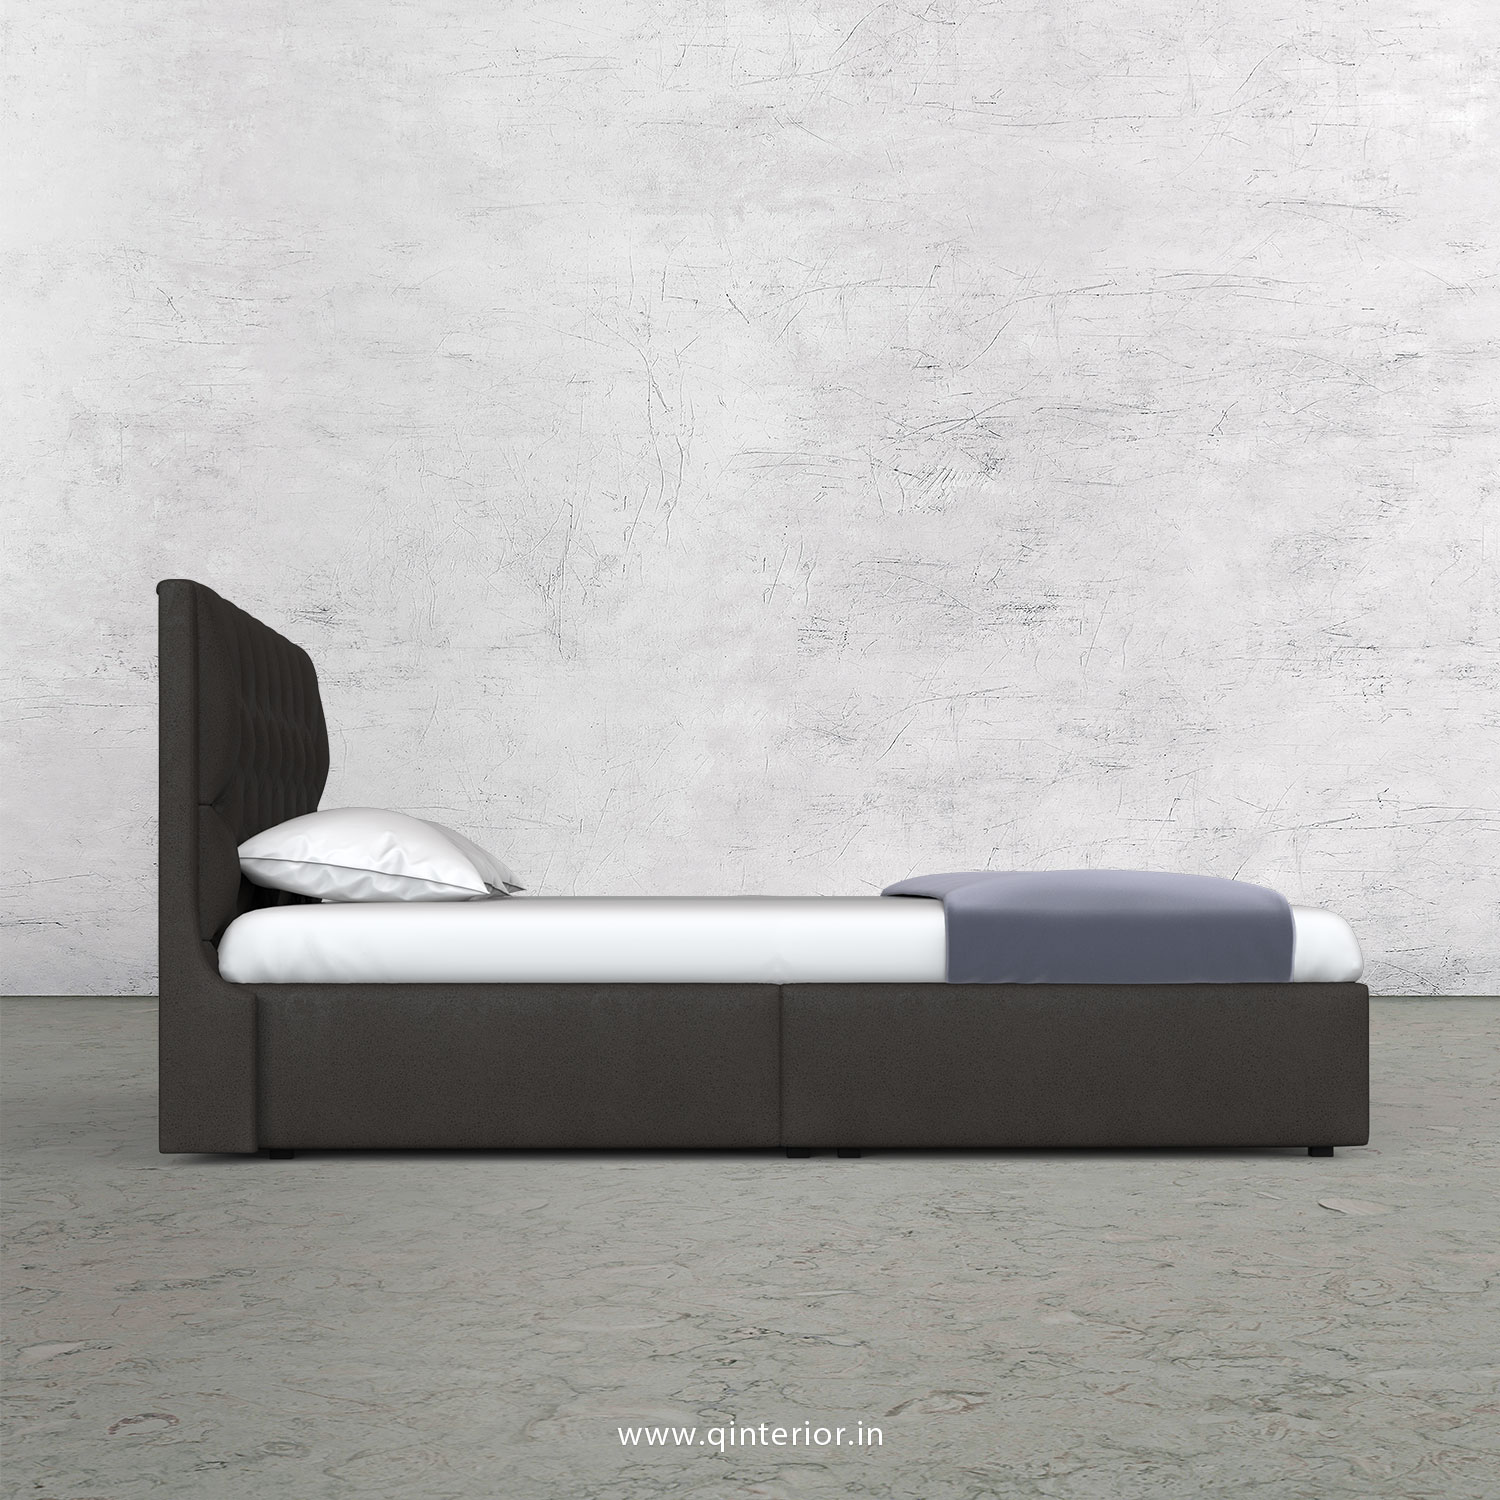 Scorpius King Size Bed in Fab Leather Fabric - KBD009 FL15